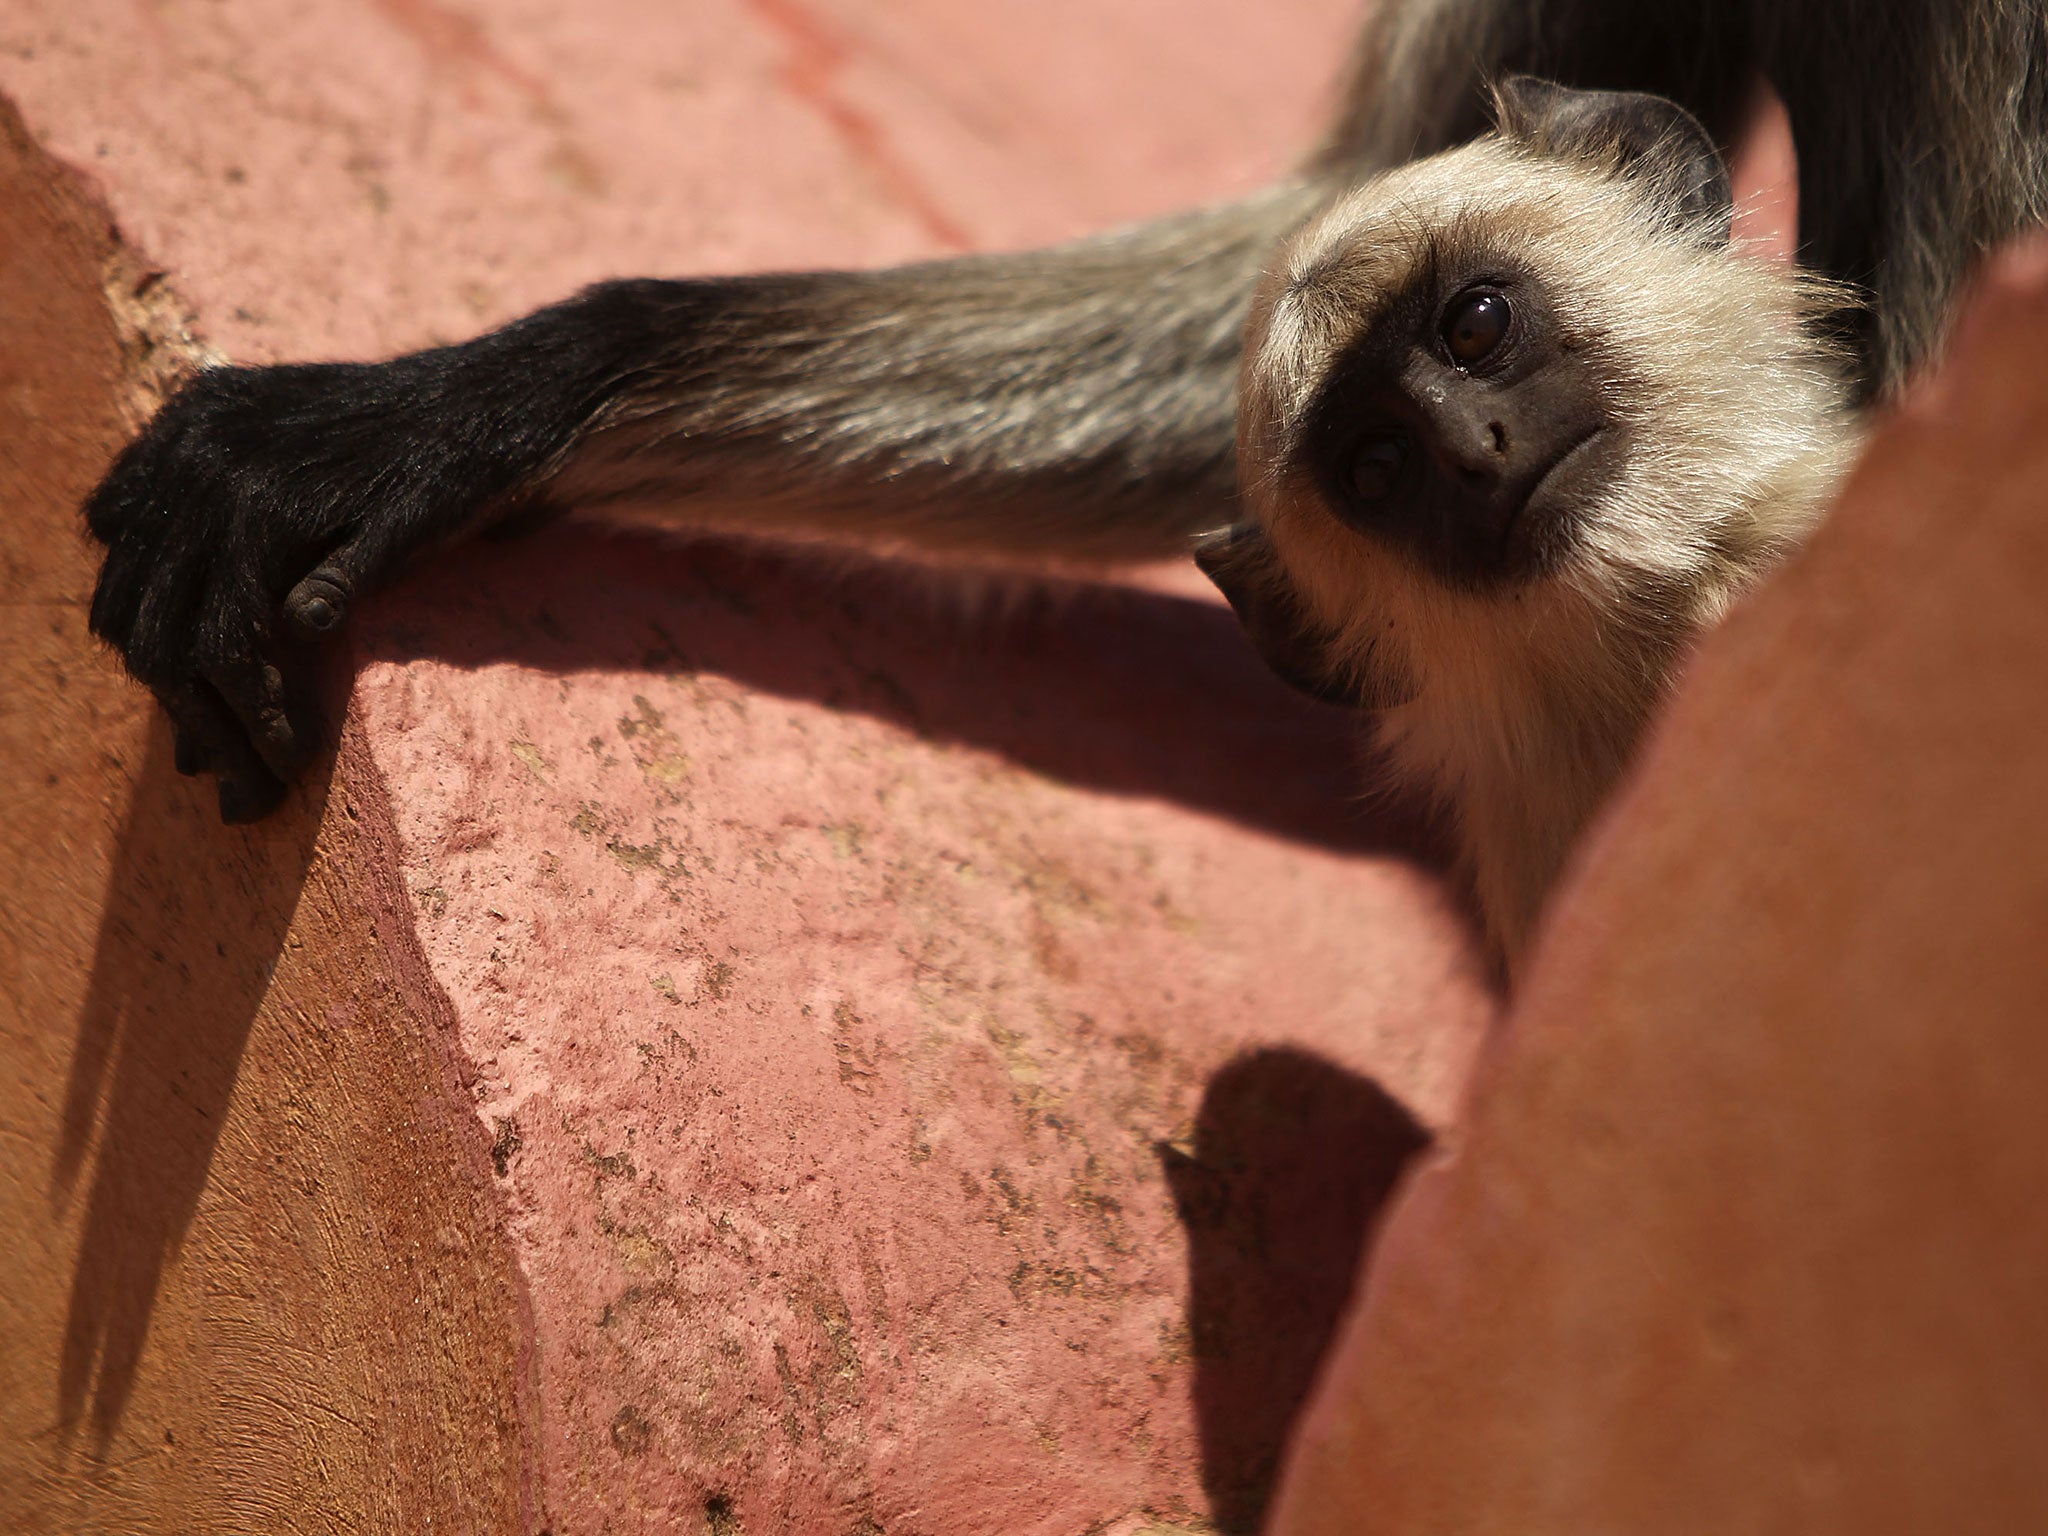 The Indian government has hired 40 people to 'disguise themselves as langurs', the type of monkey pictured here.